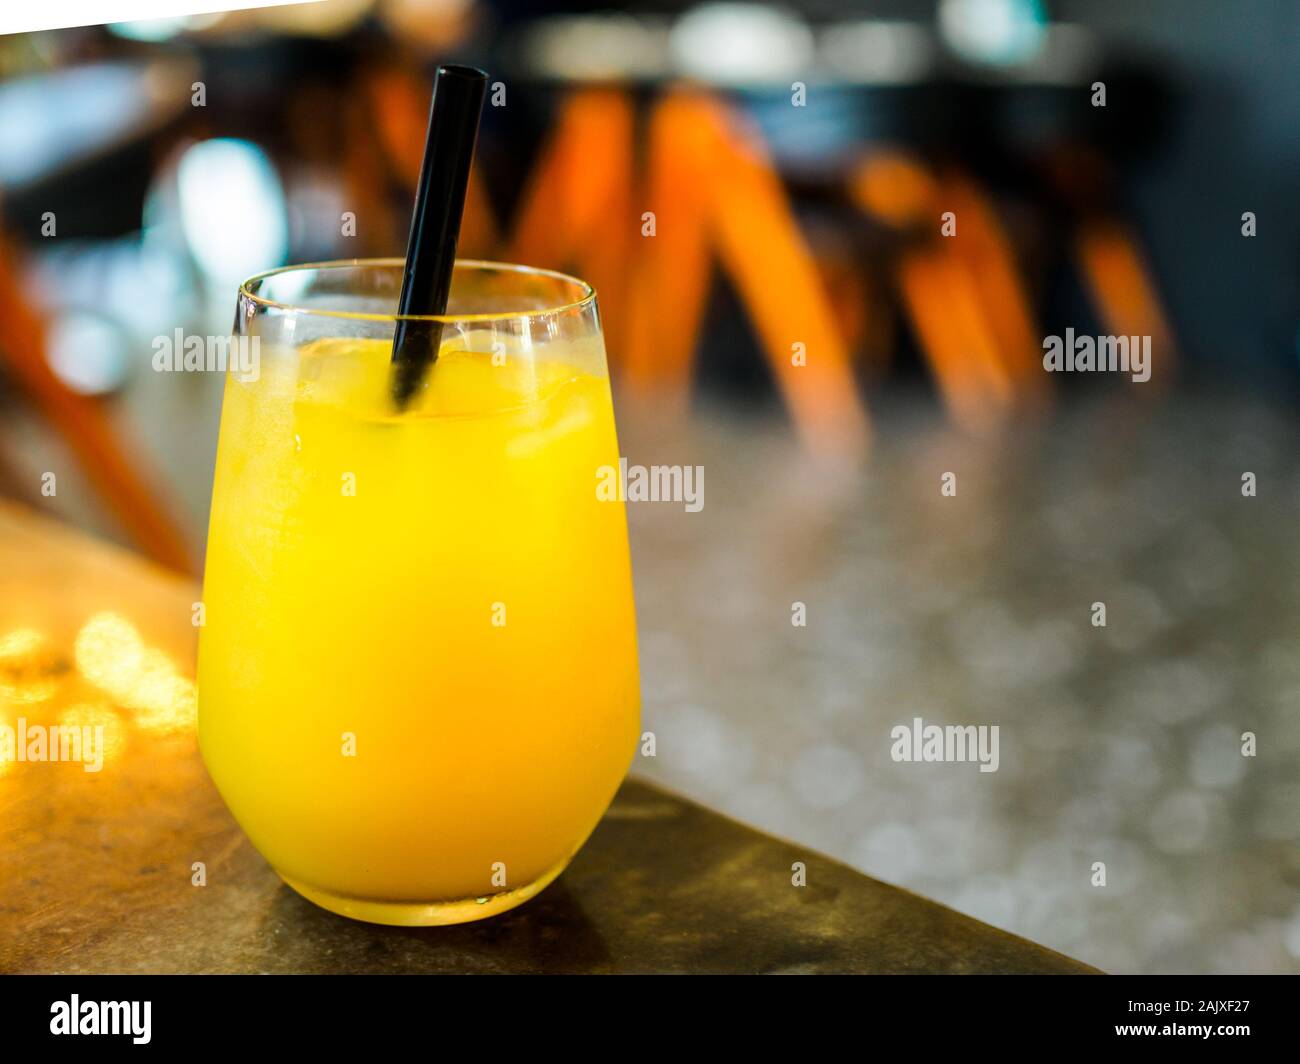 Glass of orange juice / fruit juice in a bar / pub setting with copy space. Illustrative of a teetotal healthy lifestyle Stock Photo